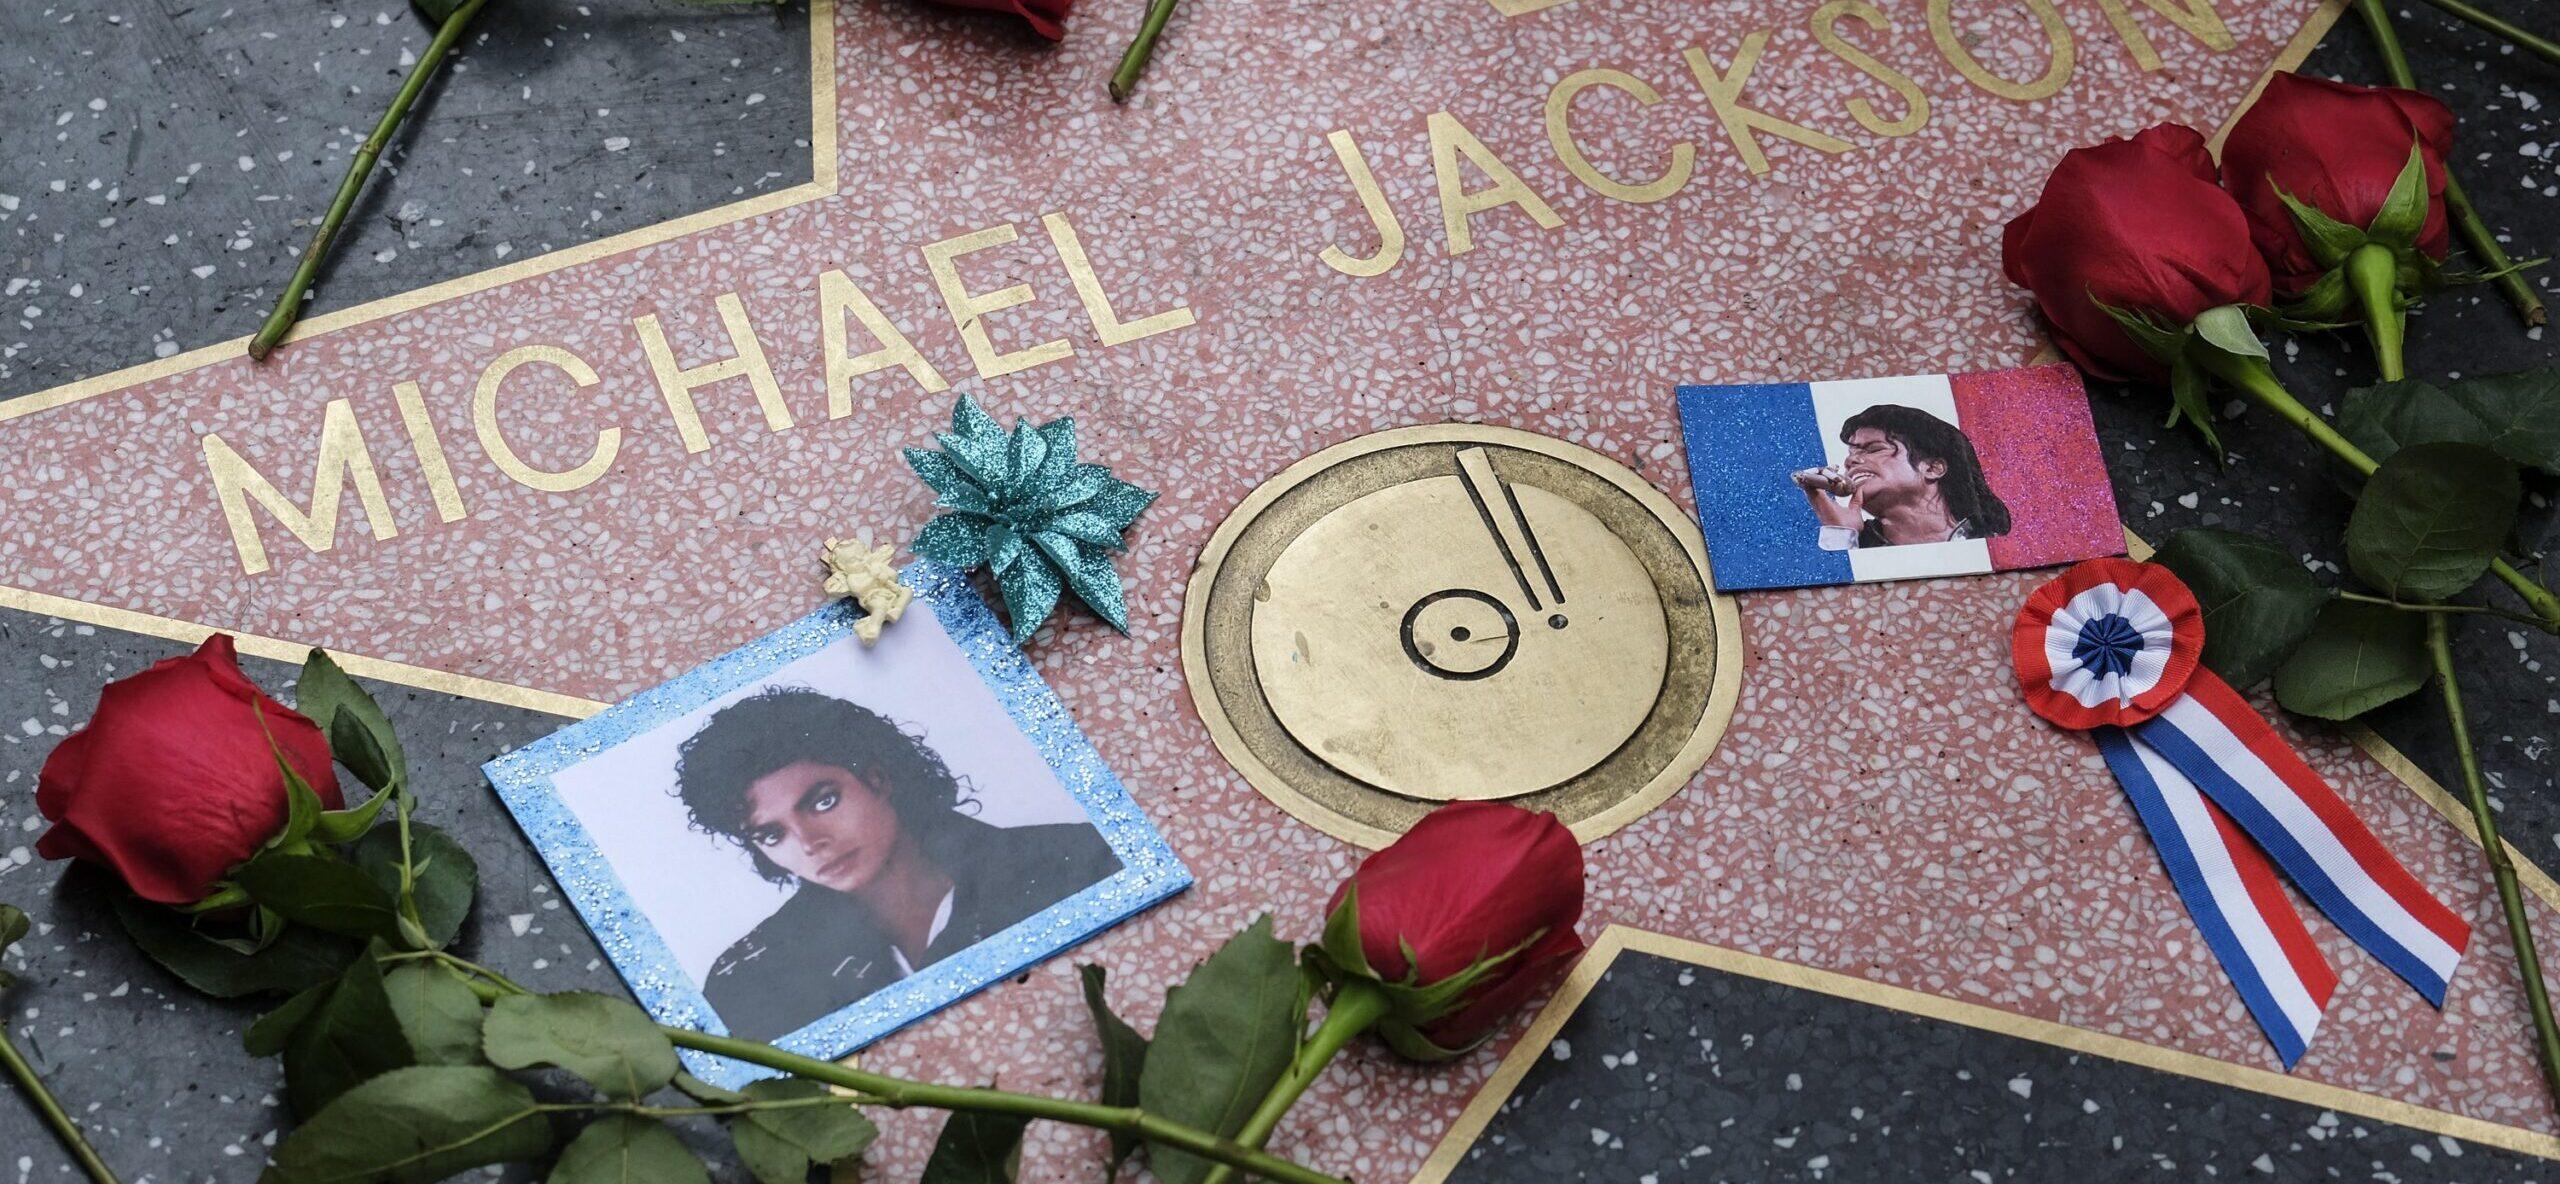 Michael Jackson's Estate Pays $2,500 To Restore His Star On Hollywood Walk Of Fame